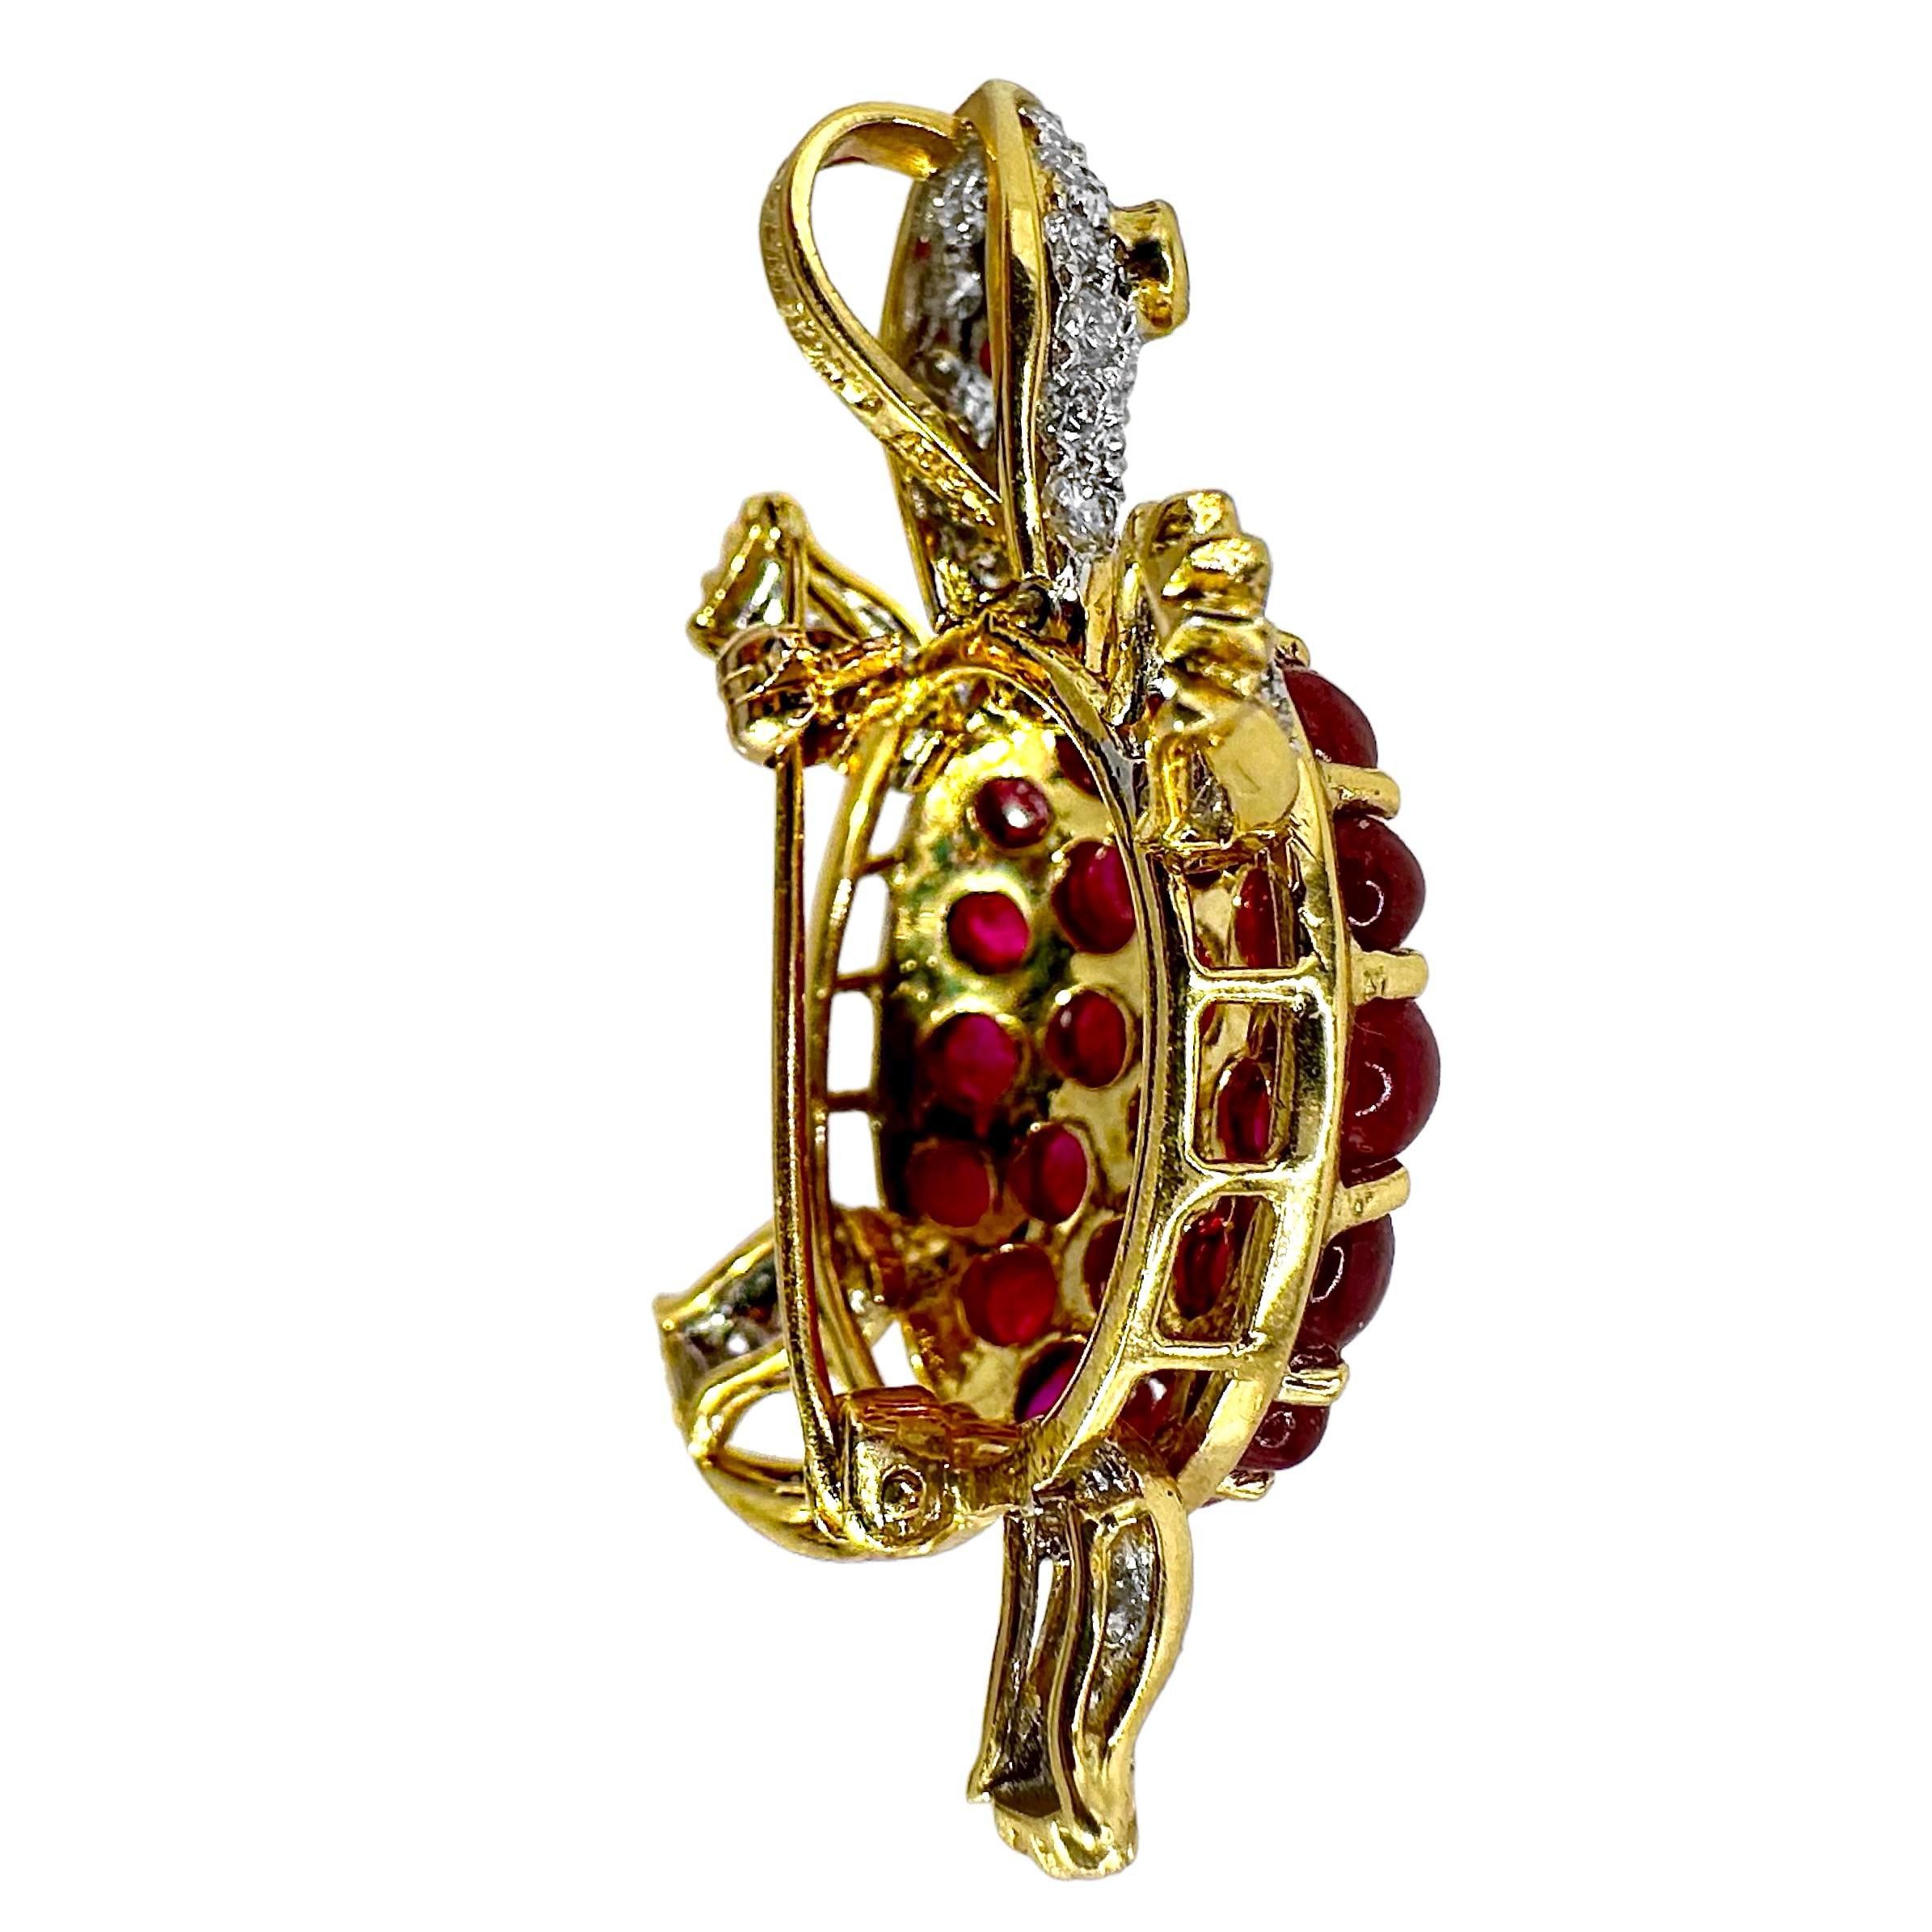 Adorable Turtle Brooch/Pendant with Motion in 18K Gold, Diamonds, and Rubies For Sale 6